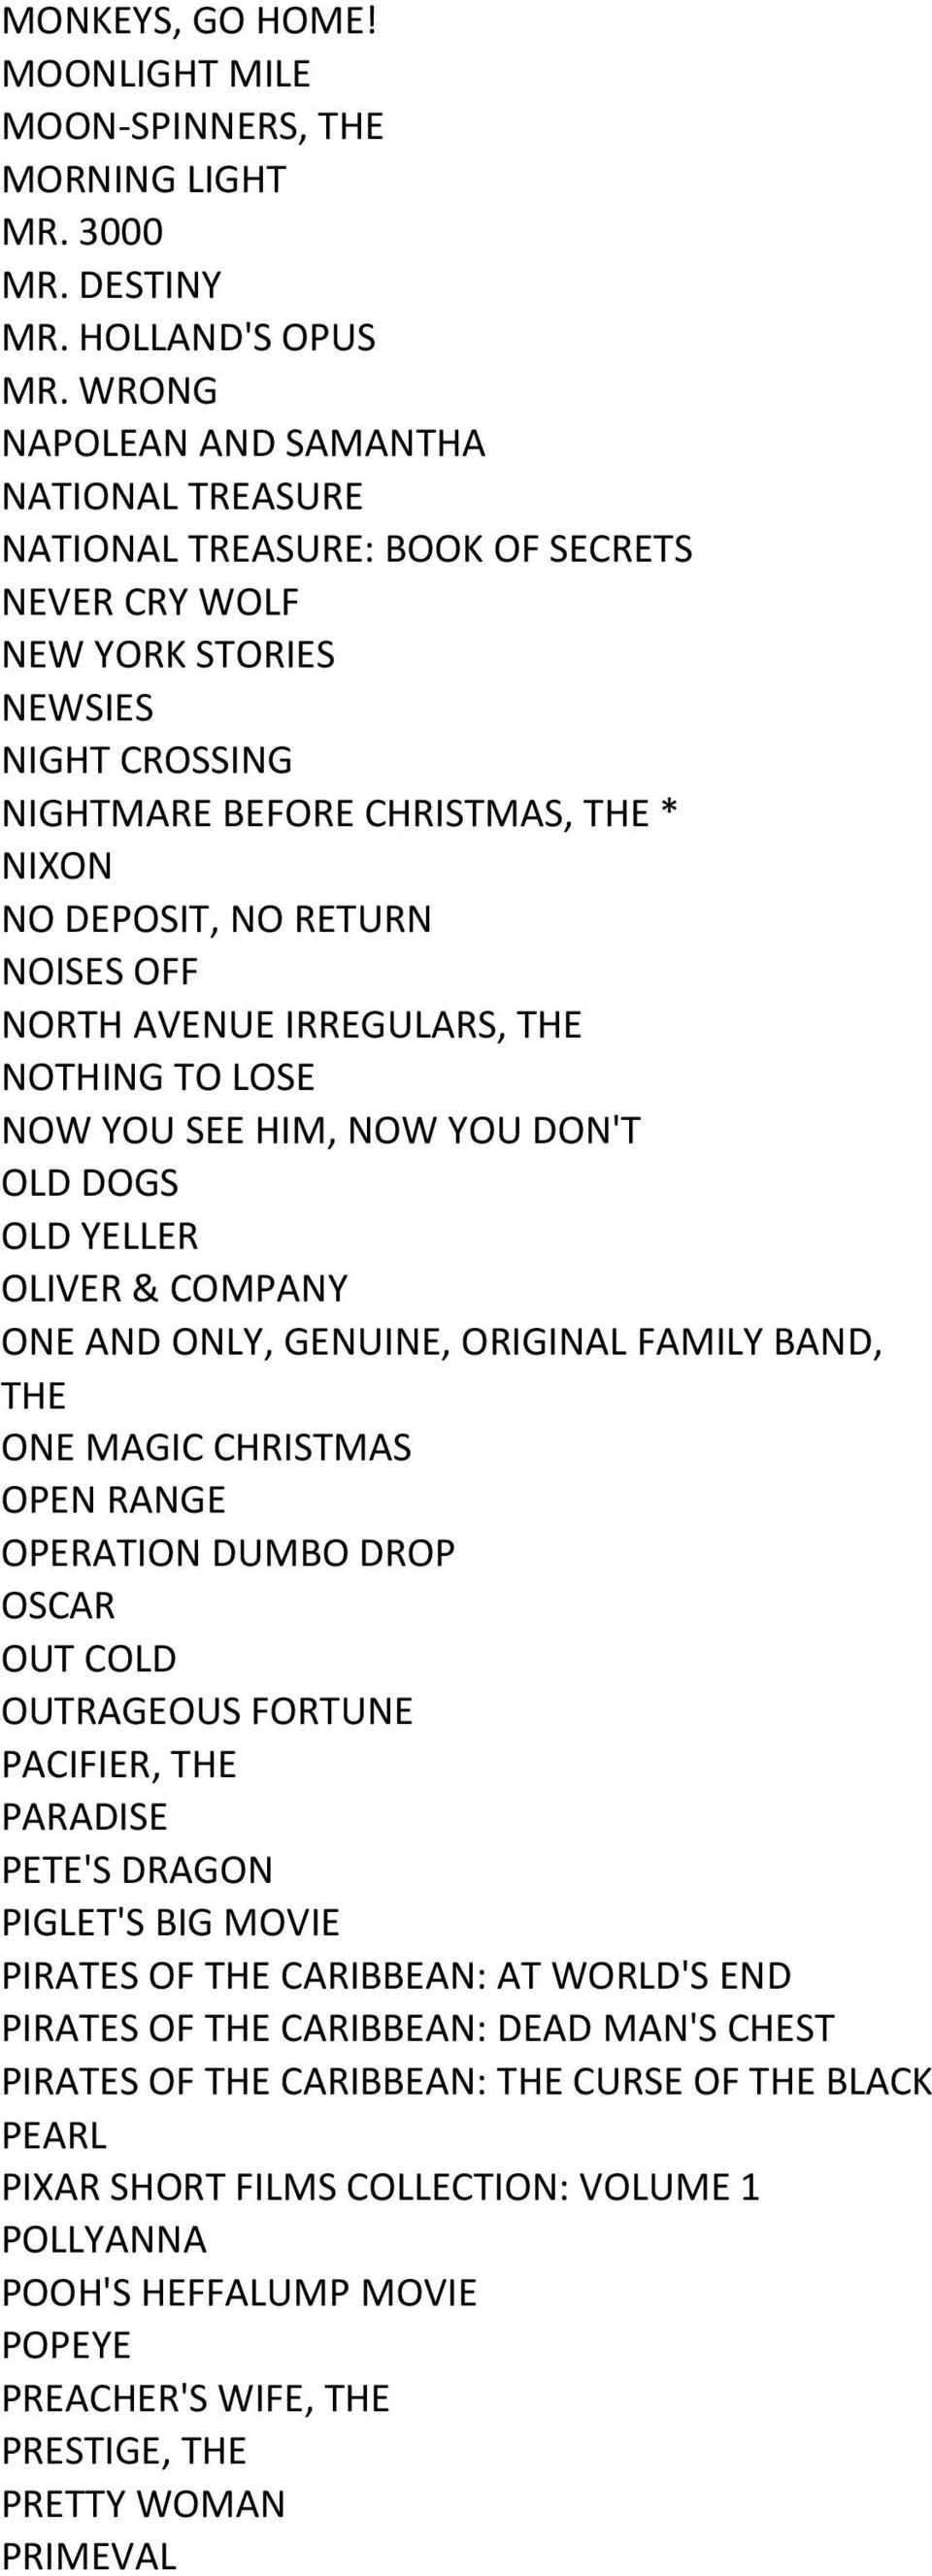 NOISES OFF NORTH AVENUE IRREGULARS, THE NOTHING TO LOSE NOW YOU SEE HIM, NOW YOU DON'T OLD DOGS OLD YELLER OLIVER & COMPANY ONE AND ONLY, GENUINE, ORIGINAL FAMILY BAND, THE ONE MAGIC CHRISTMAS OPEN